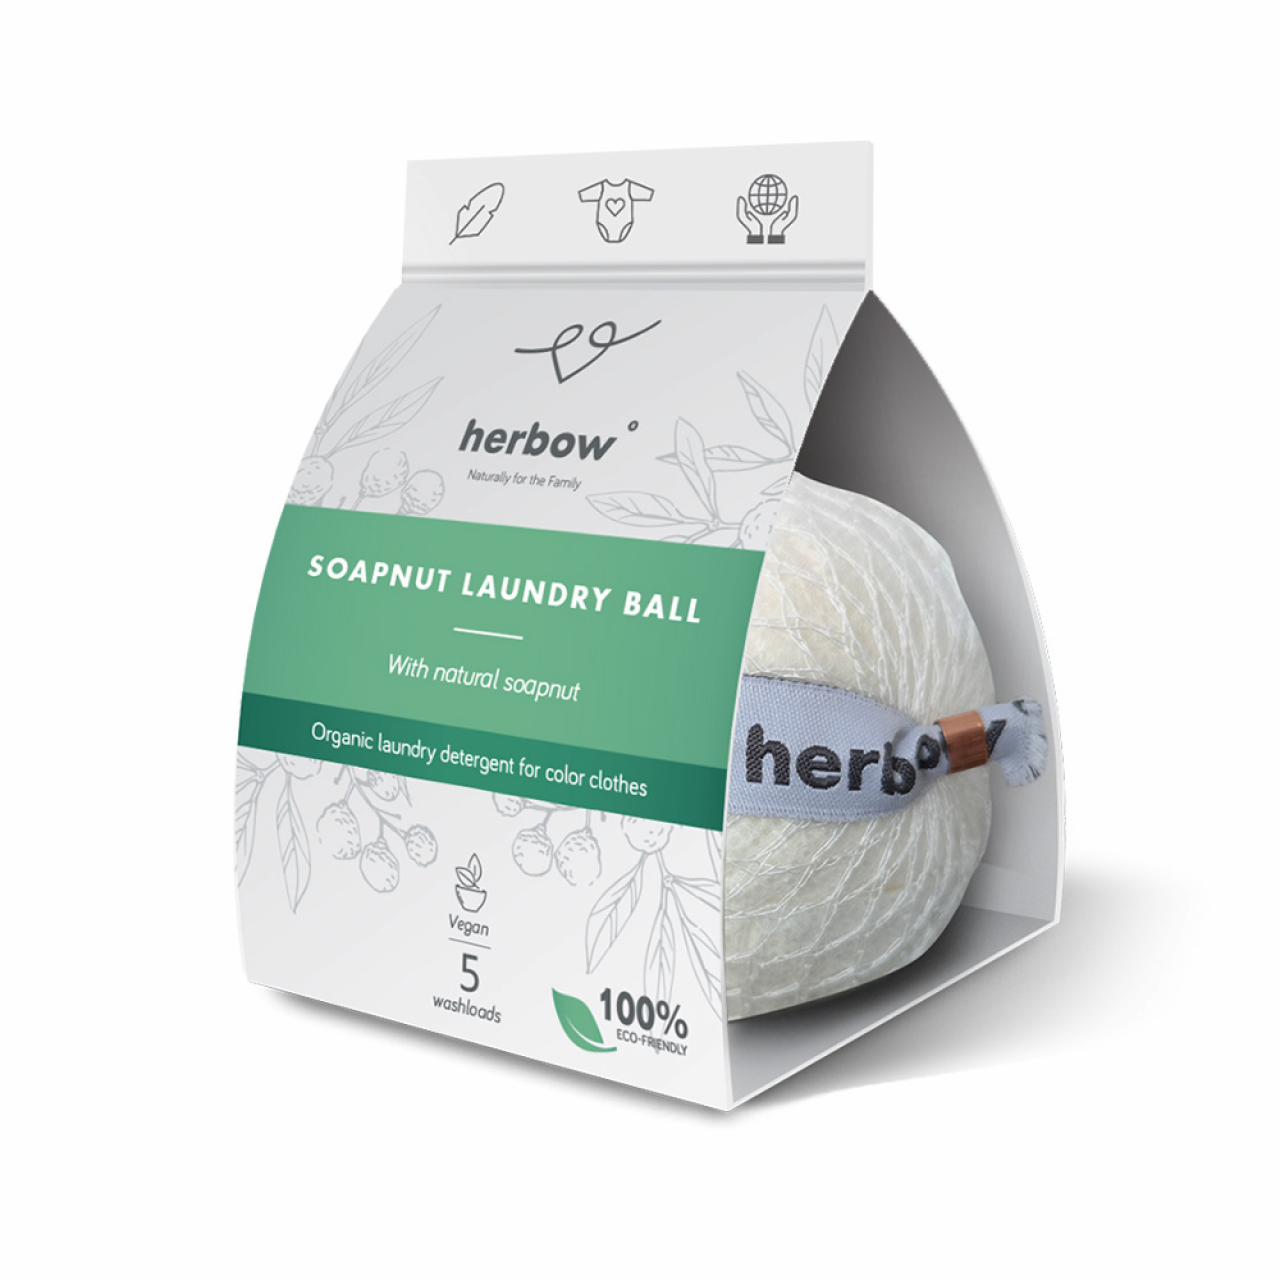 Herbow<br>Soapnut Laundry Ball<br>1pc/5 washes